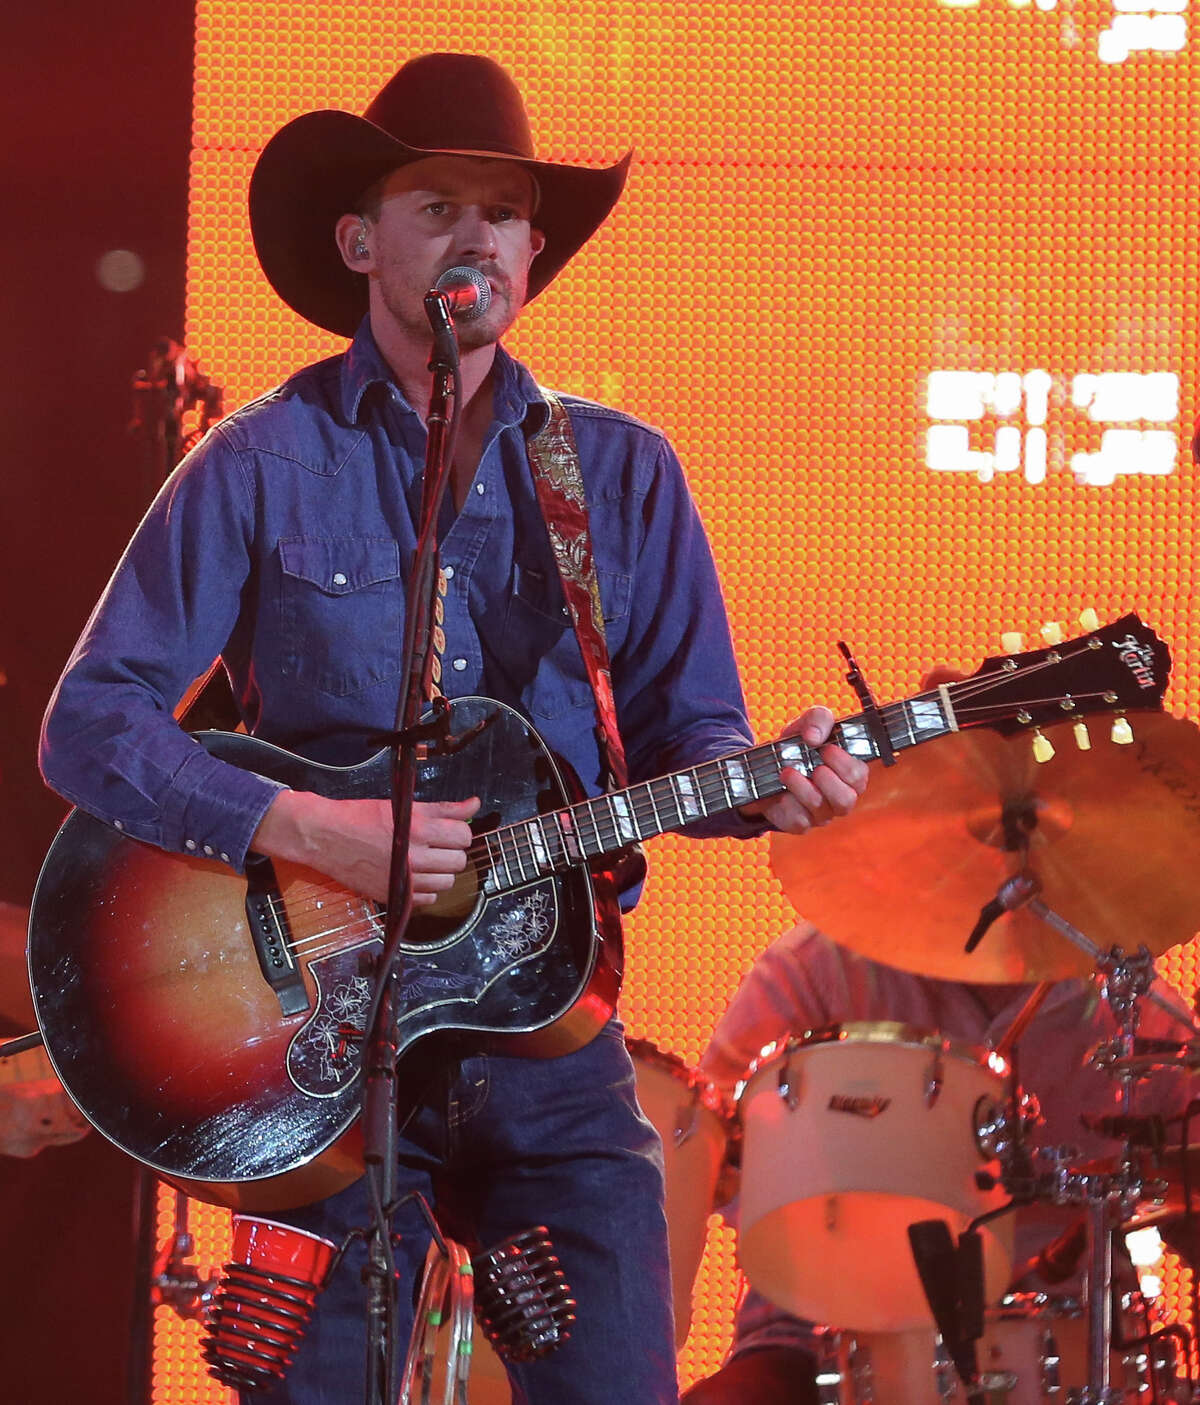 Turnpike Troubadours keep it lean and tight at RodeoHouston